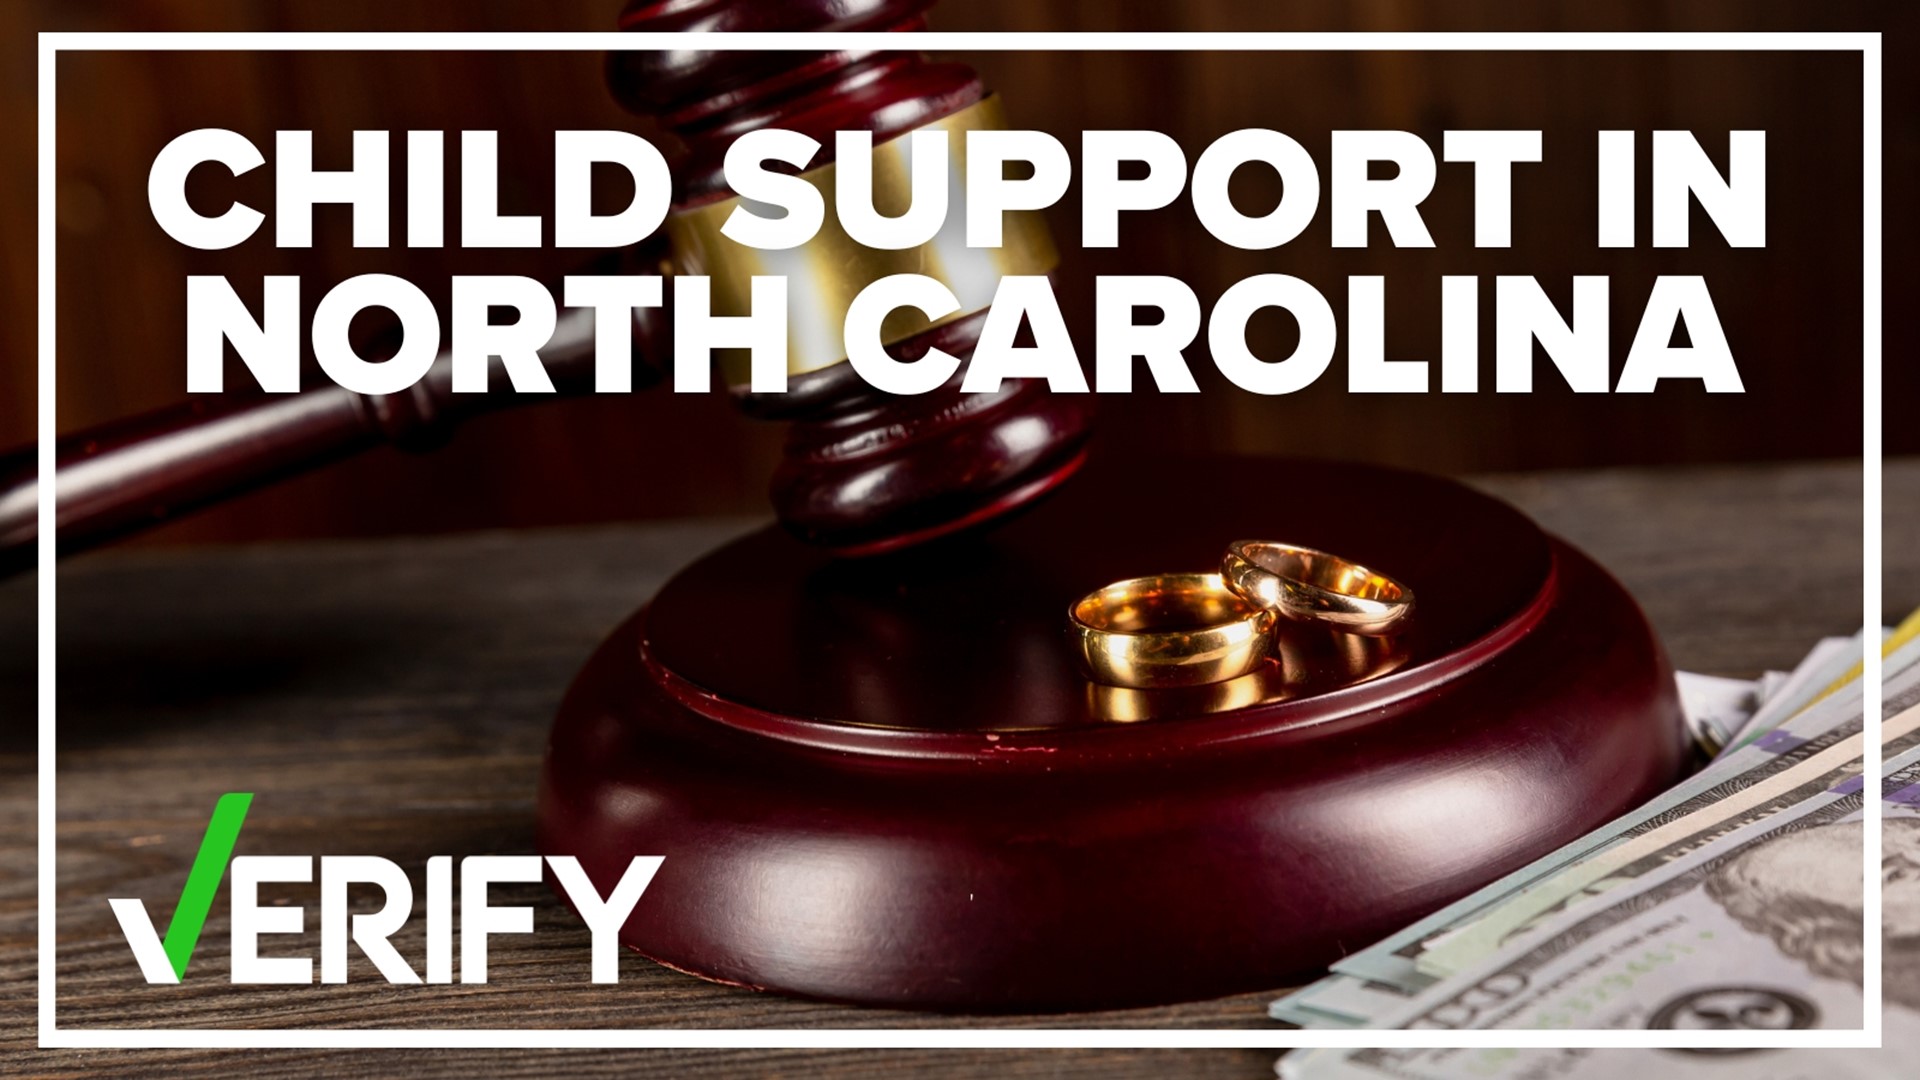 Every four years, the North Carolina General Assembly updates the child support guidelines. Here are some of the changes.